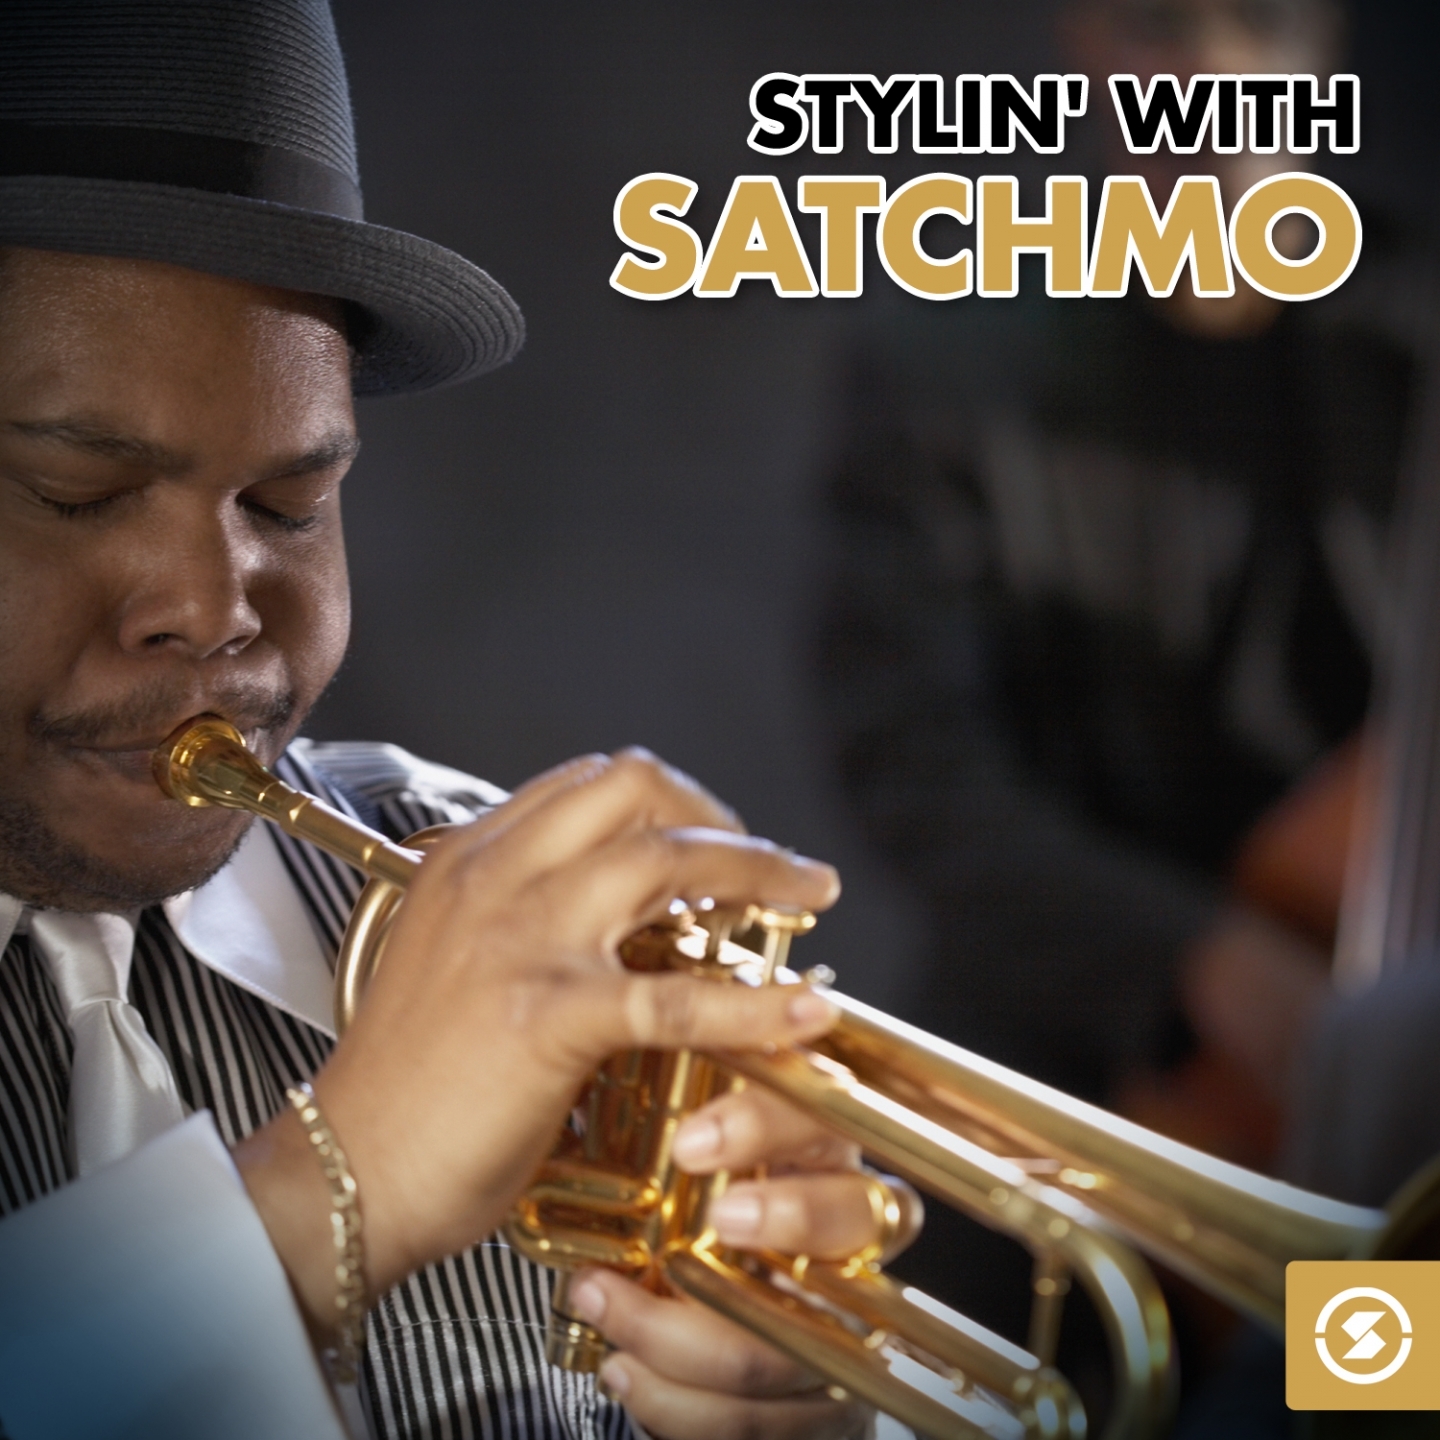 Stylin' with Satchmo